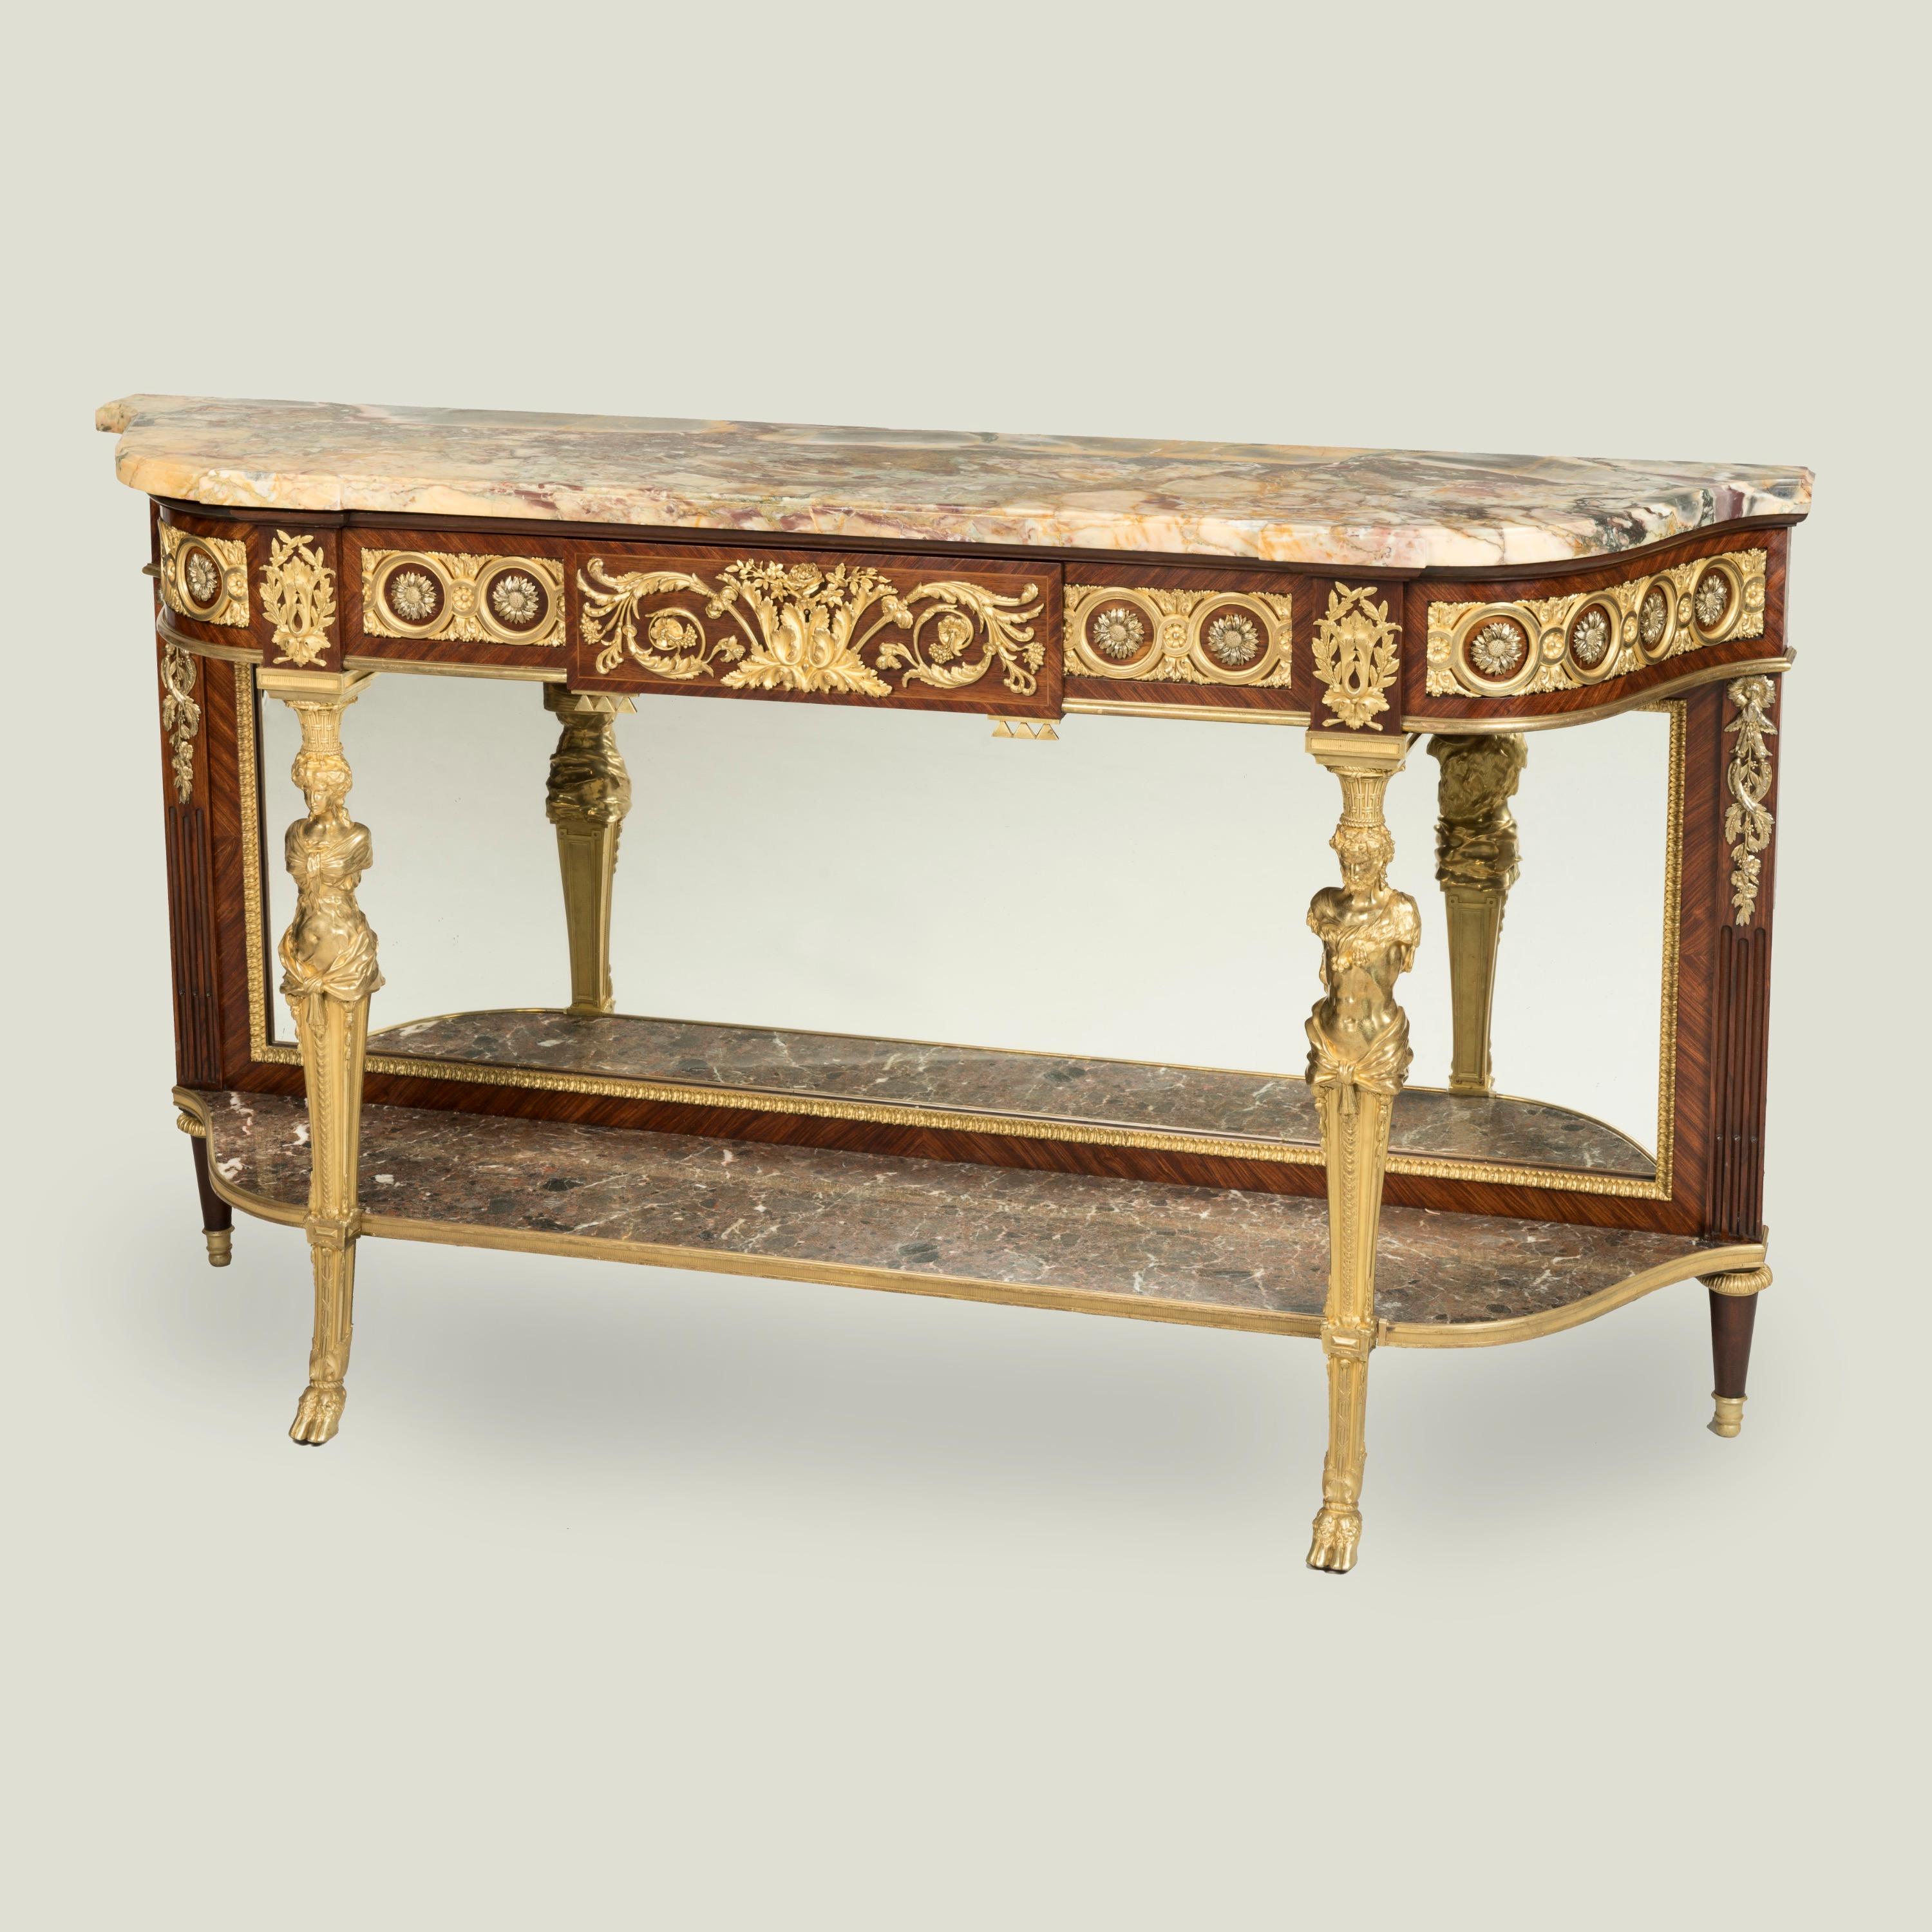 19th Century French Ormolu-Mounted Kingwood Console Table in the Louis XVI Style In Good Condition For Sale In London, GB